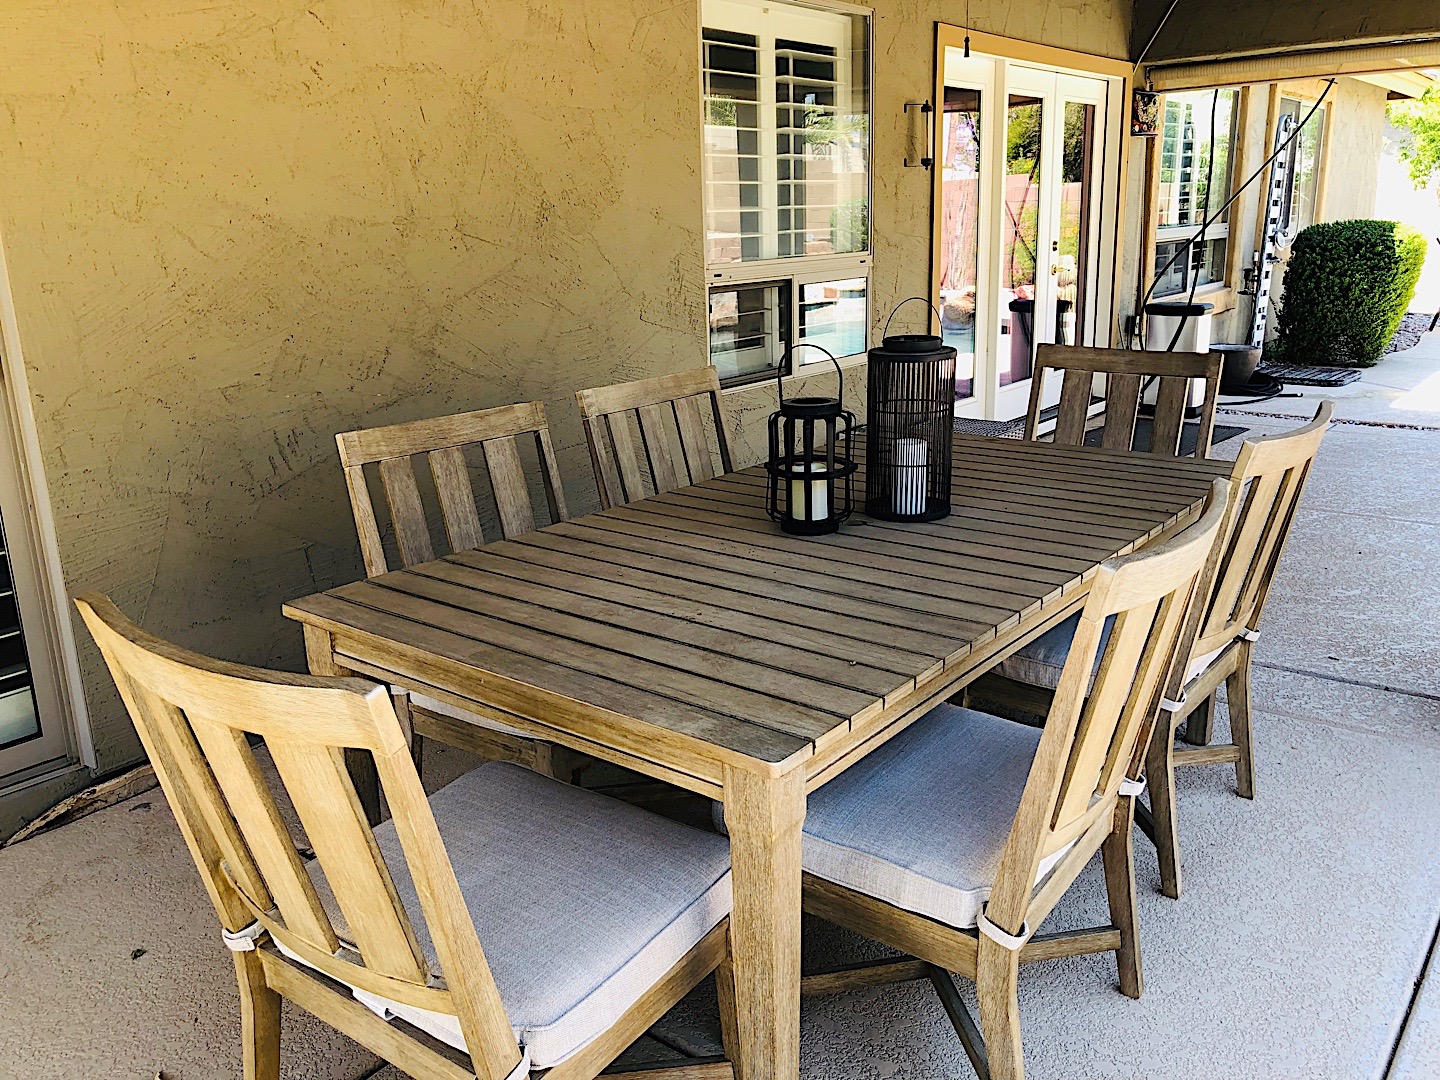 Enjoy your favorite BBQ meal outside at the dining table